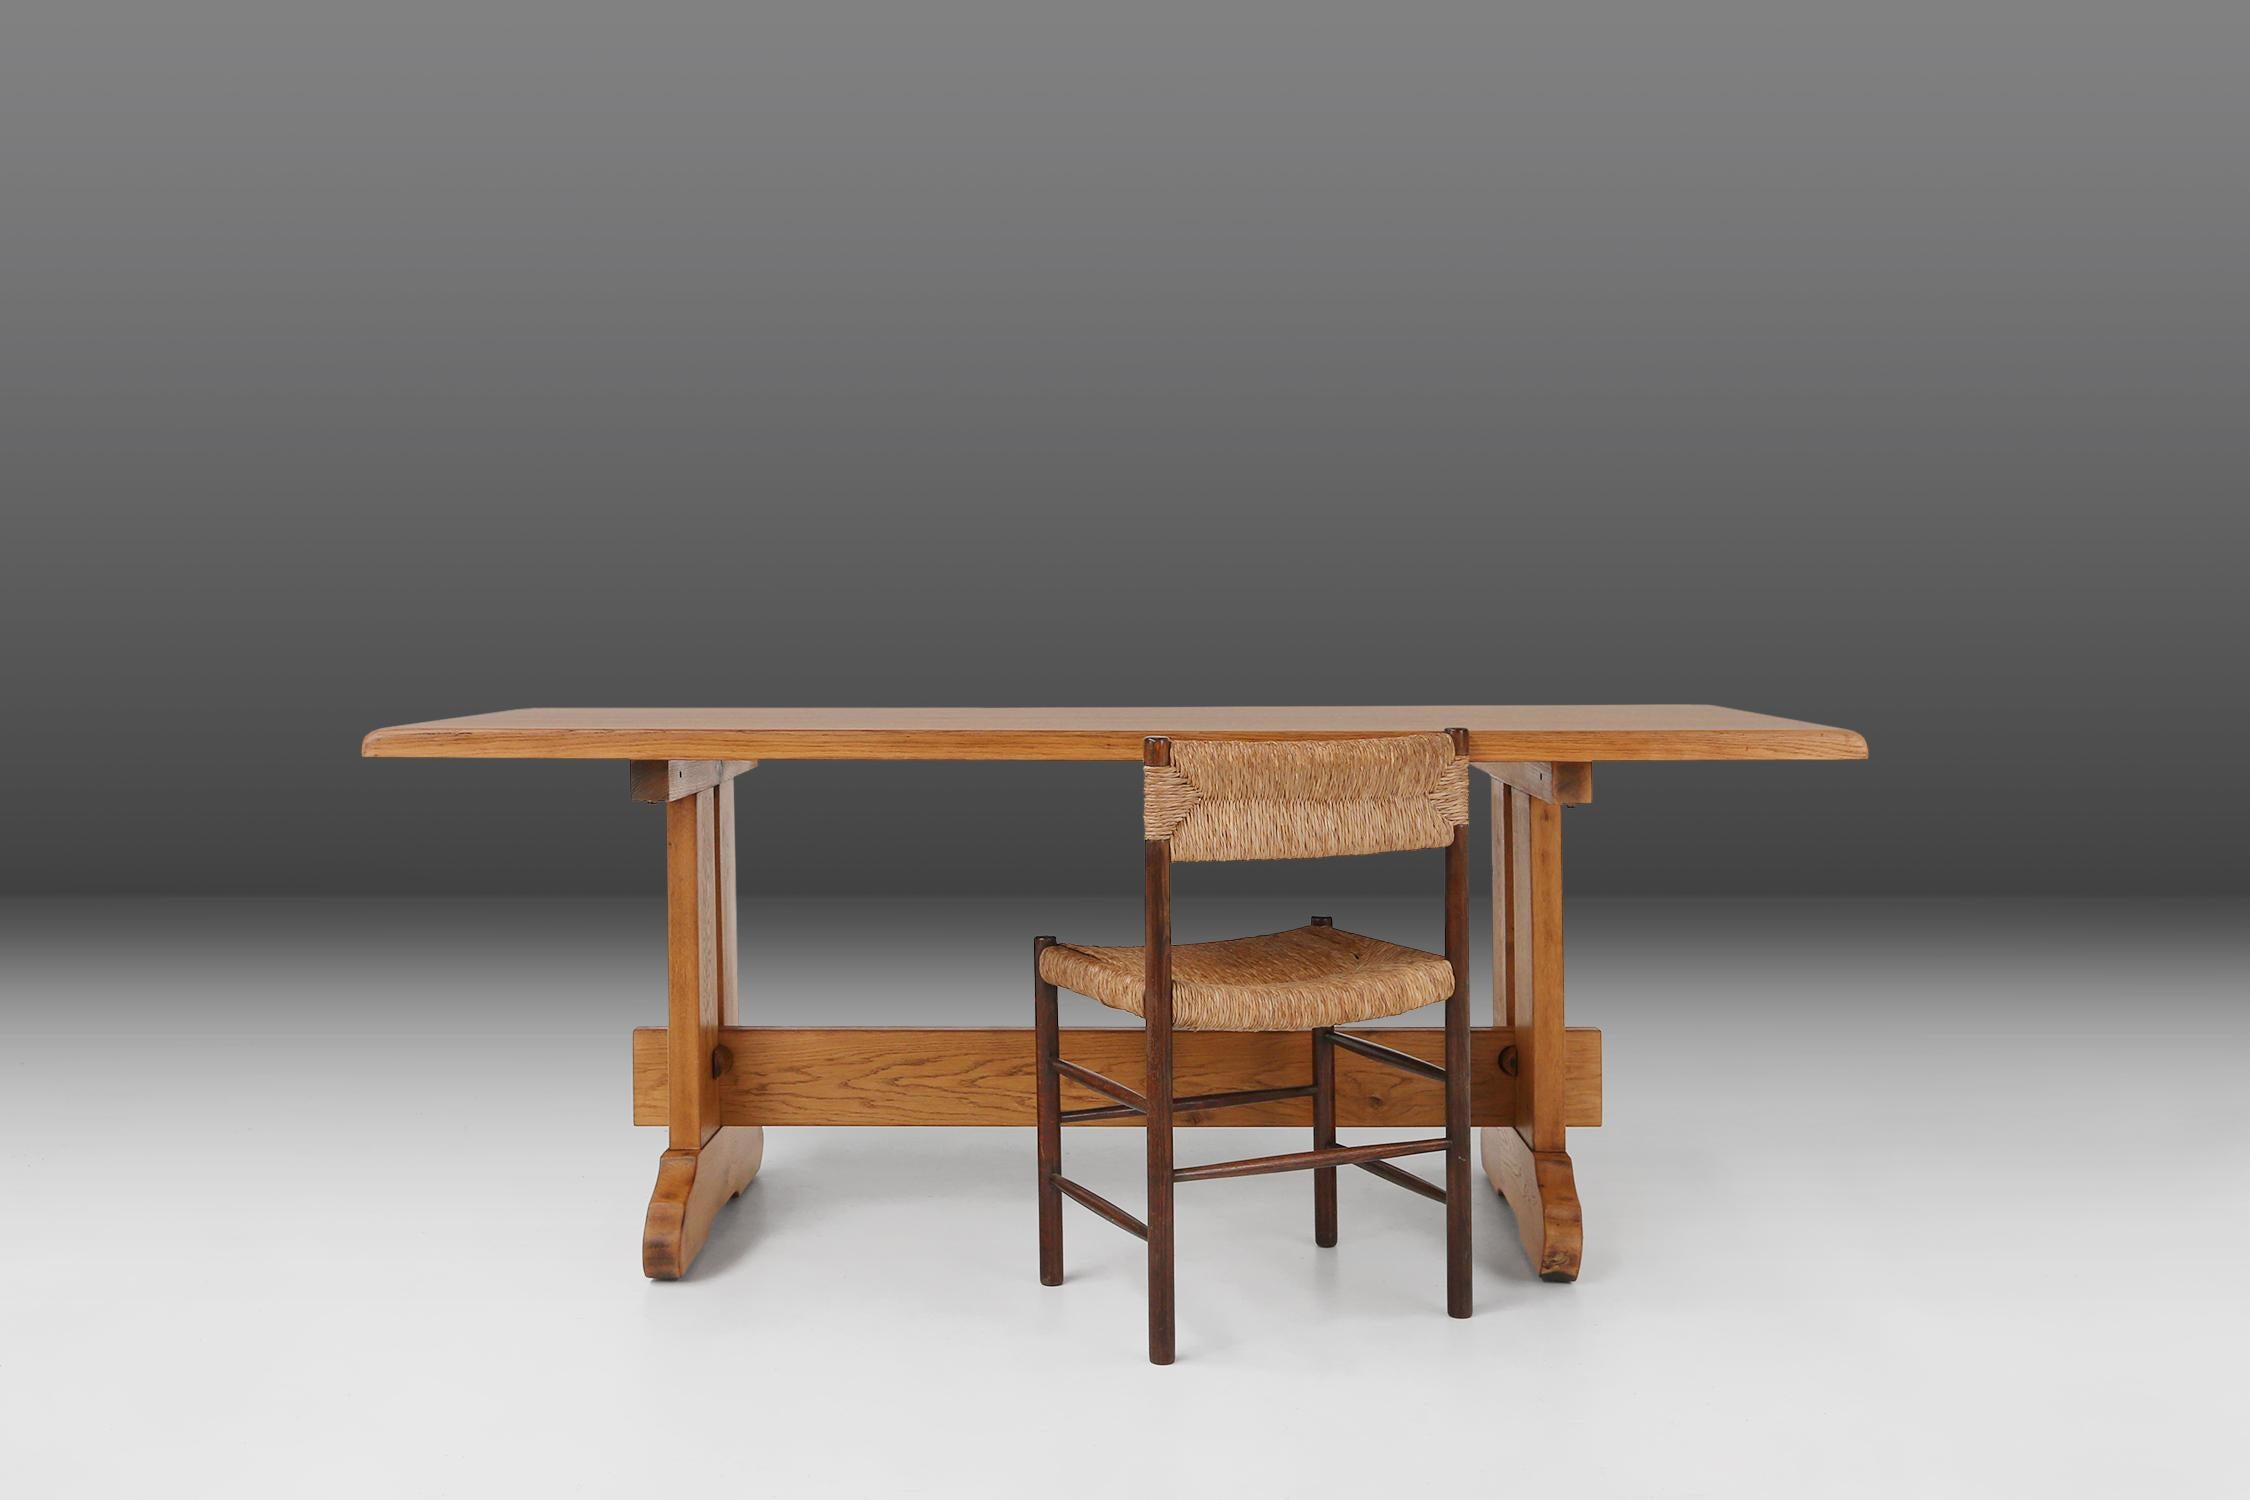 France / 1950s / table / oak wood / mid-century / rustic

A brutalist oak table made in France around 1950, in the style of the French designer Charlotte Perriand. This Mid-century oak table was crafted with utmost precision and adorned with